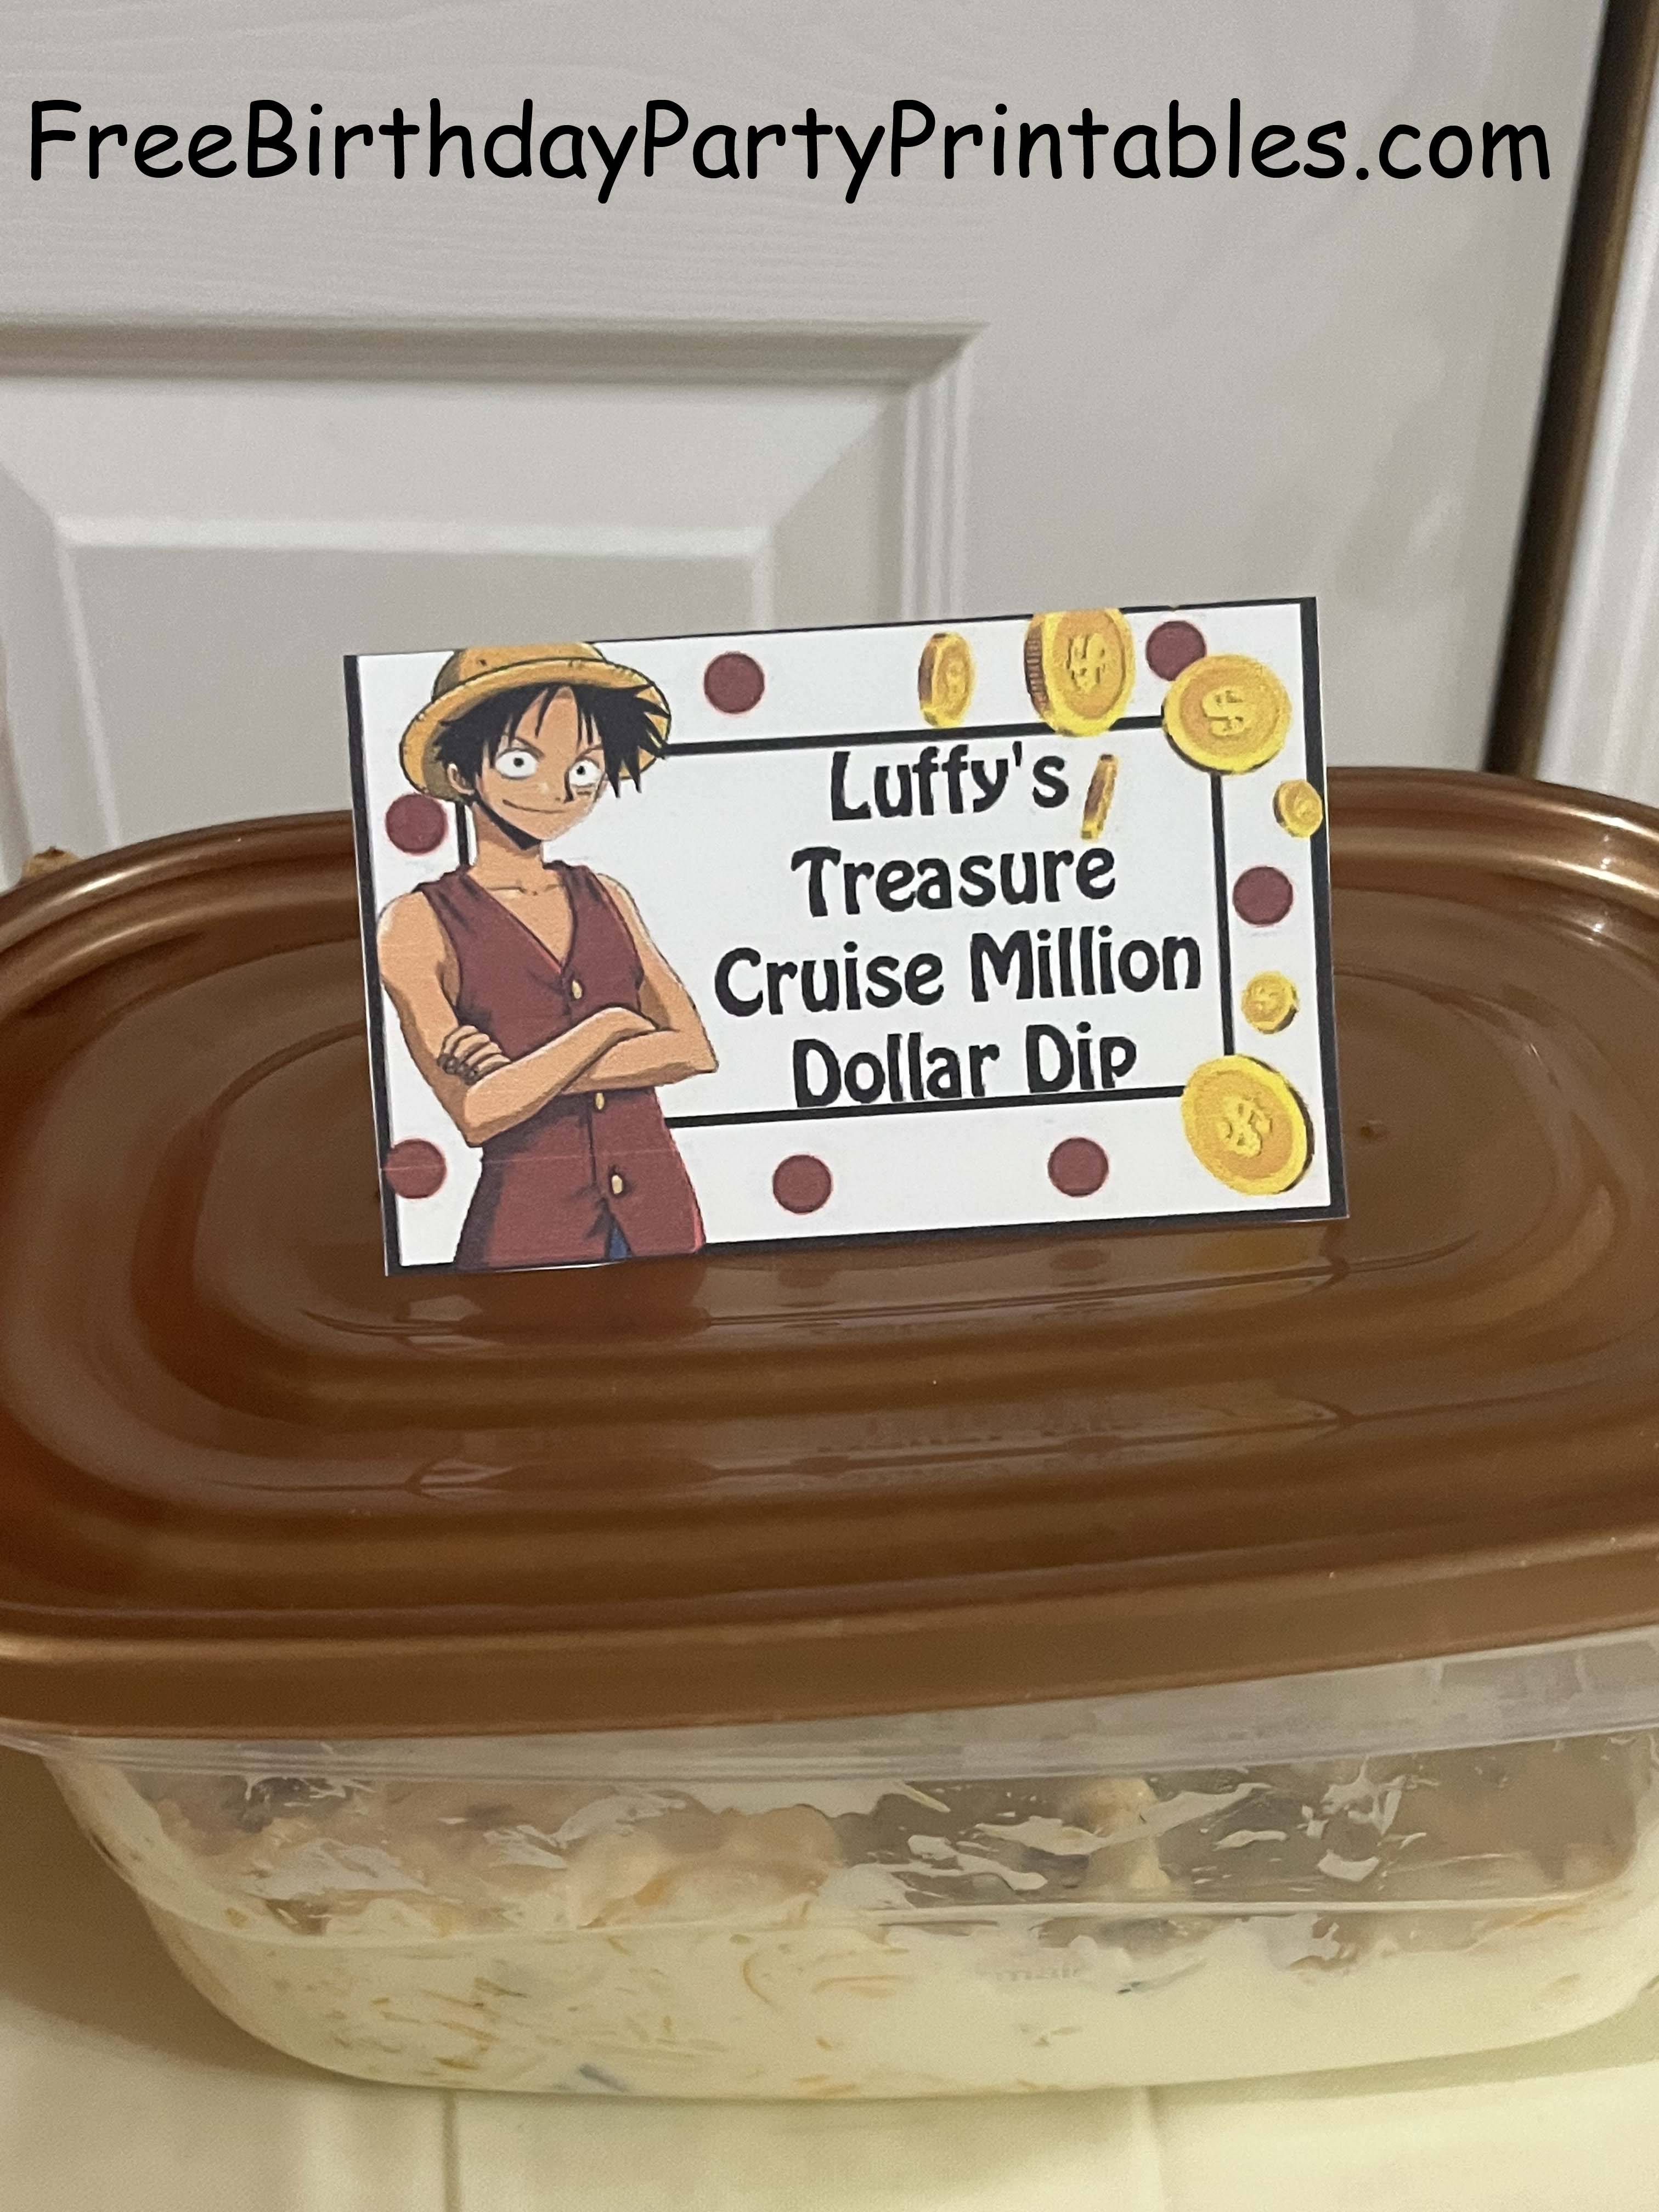 One Piece Birthday Party Printables Free Food Cards Luffy's Treasure Cruise Million Dollar Dip